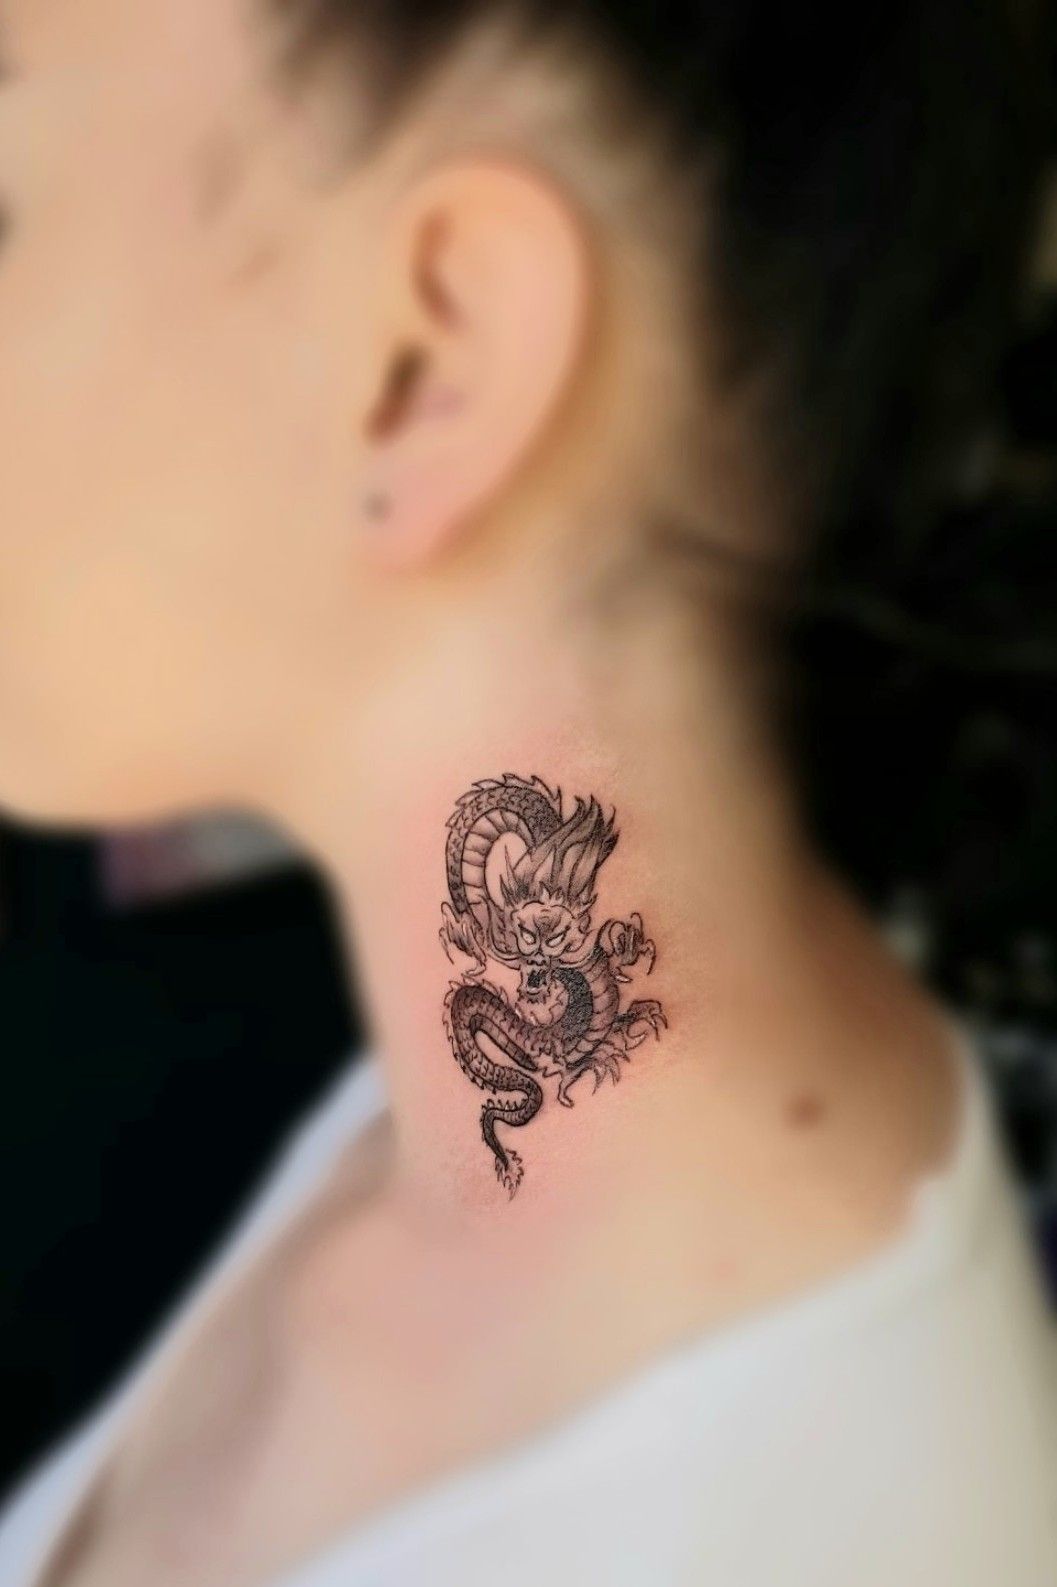 Tattoo of a red dragon done on the back of the neck